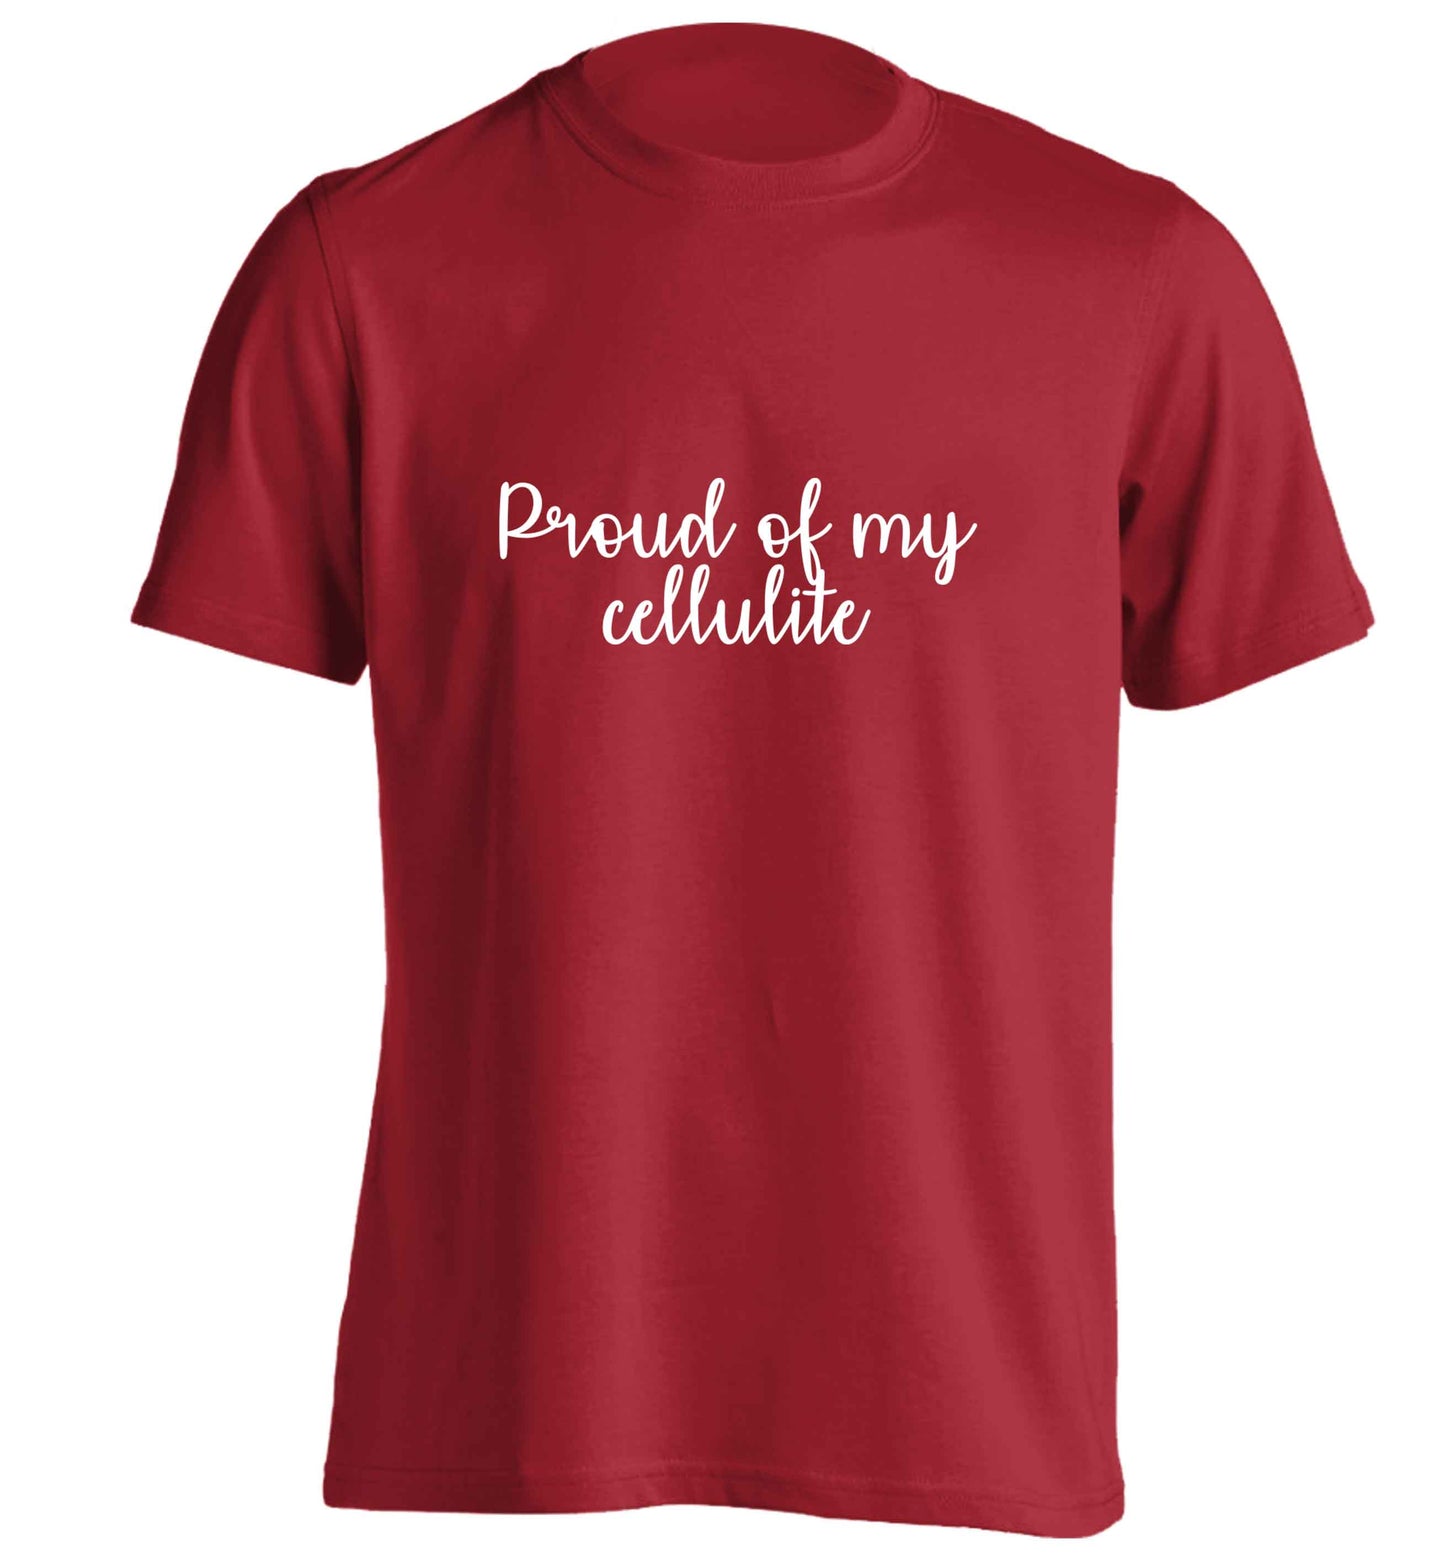 Proud of my cellulite adults unisex red Tshirt 2XL